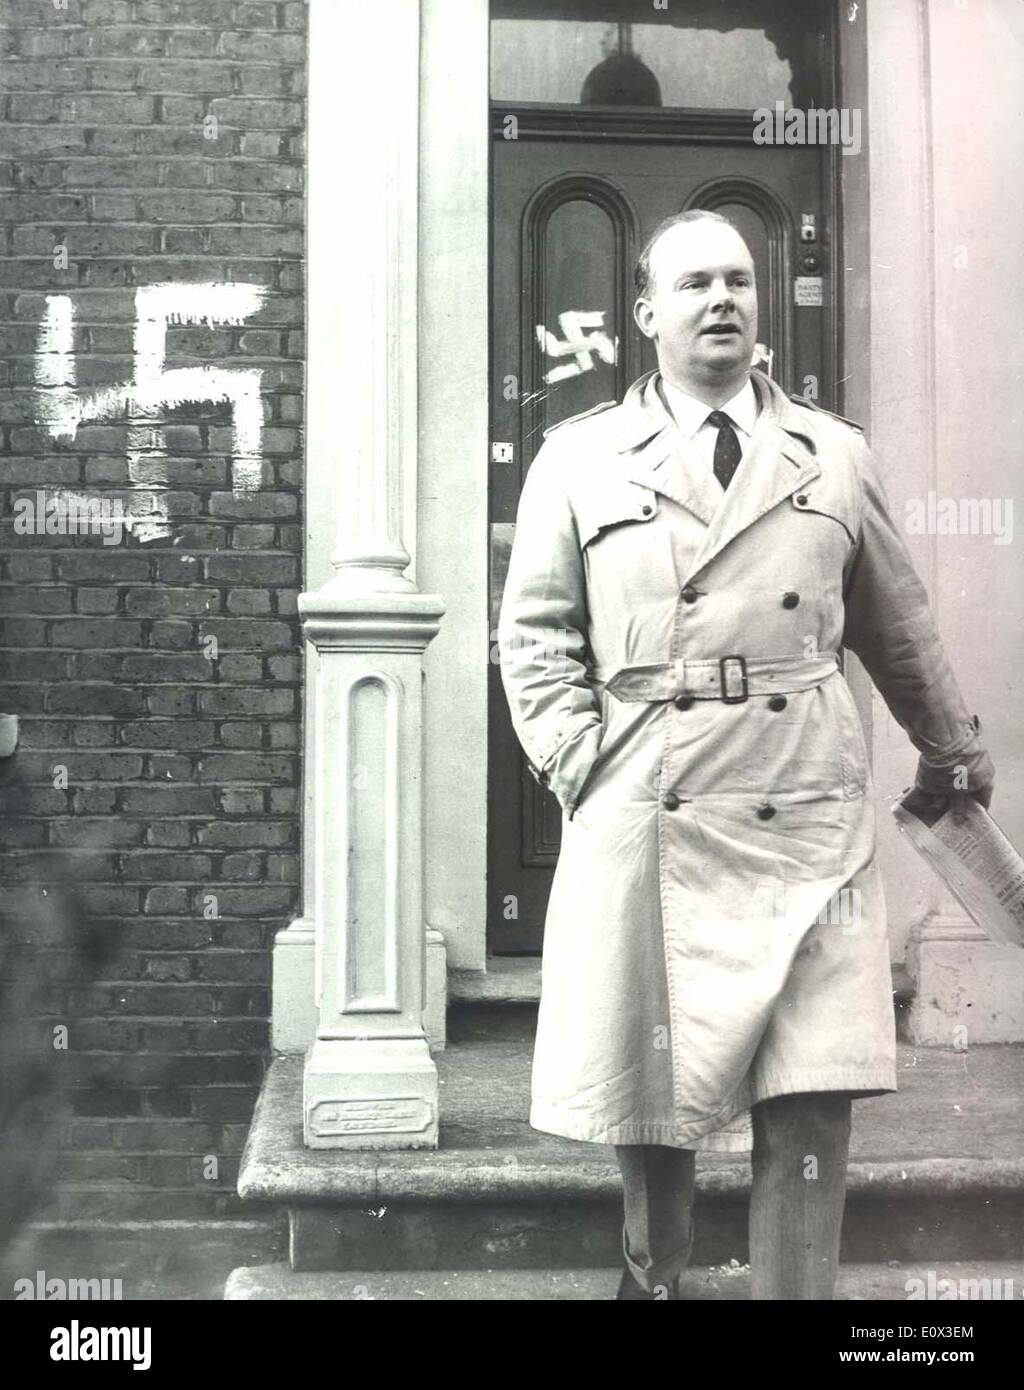 Jan 04, 1965 - London, England, United Kingdom - COLIN JORDAN Leaves the Committee Room, which are dubbed with swastikas, after Photo - Alamy